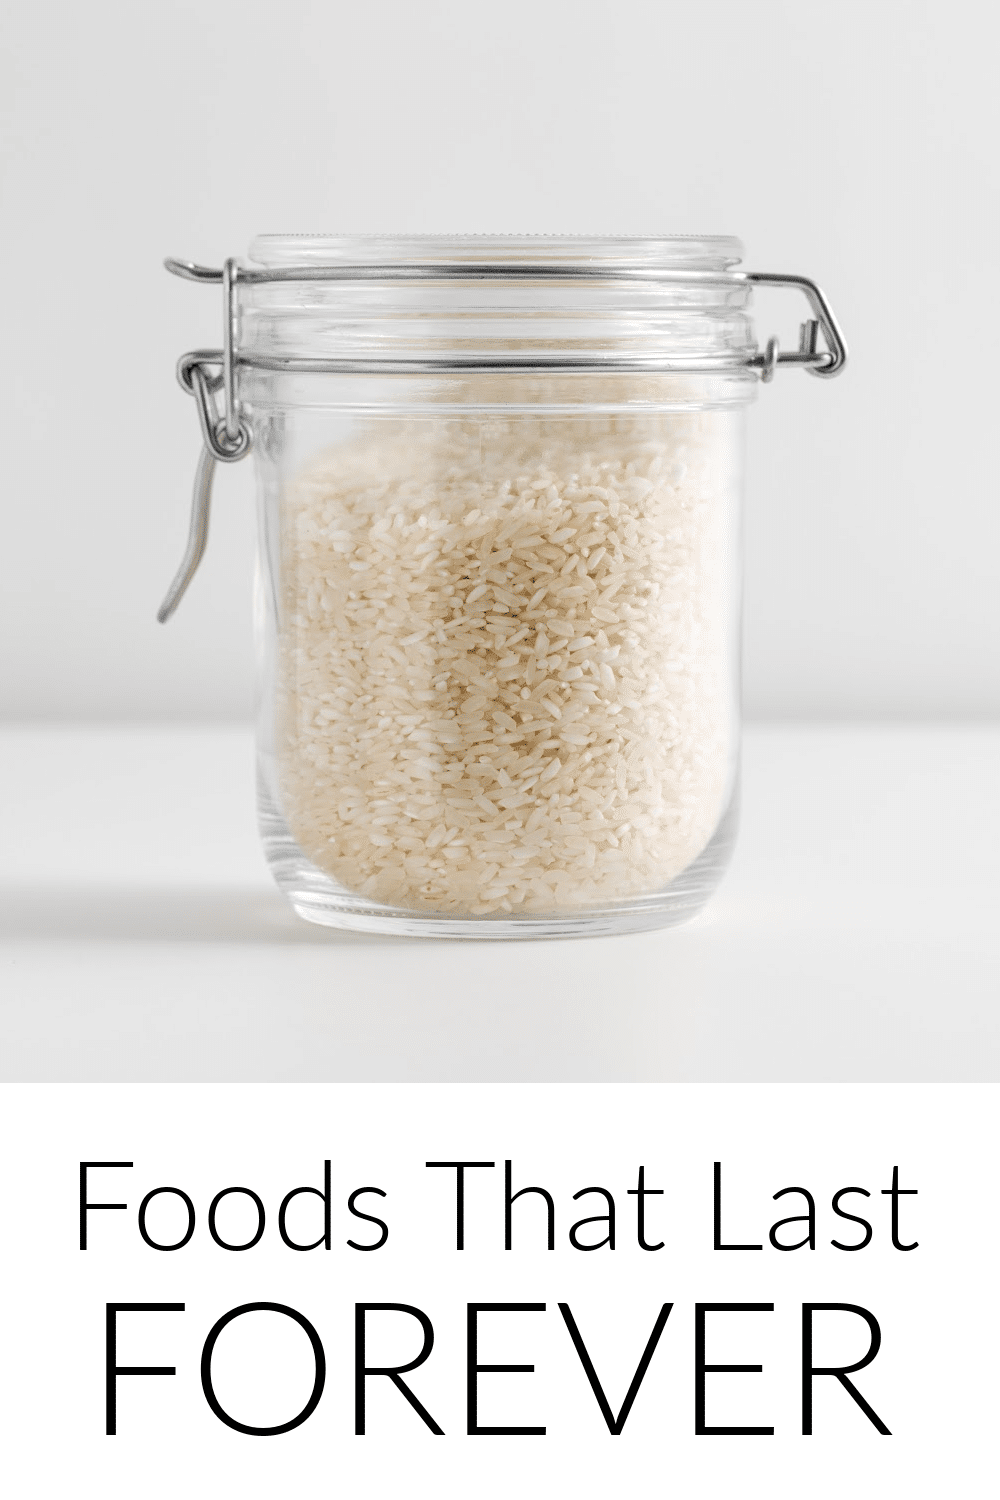 Foods that last forever, These foods Never expire - jar of white rice